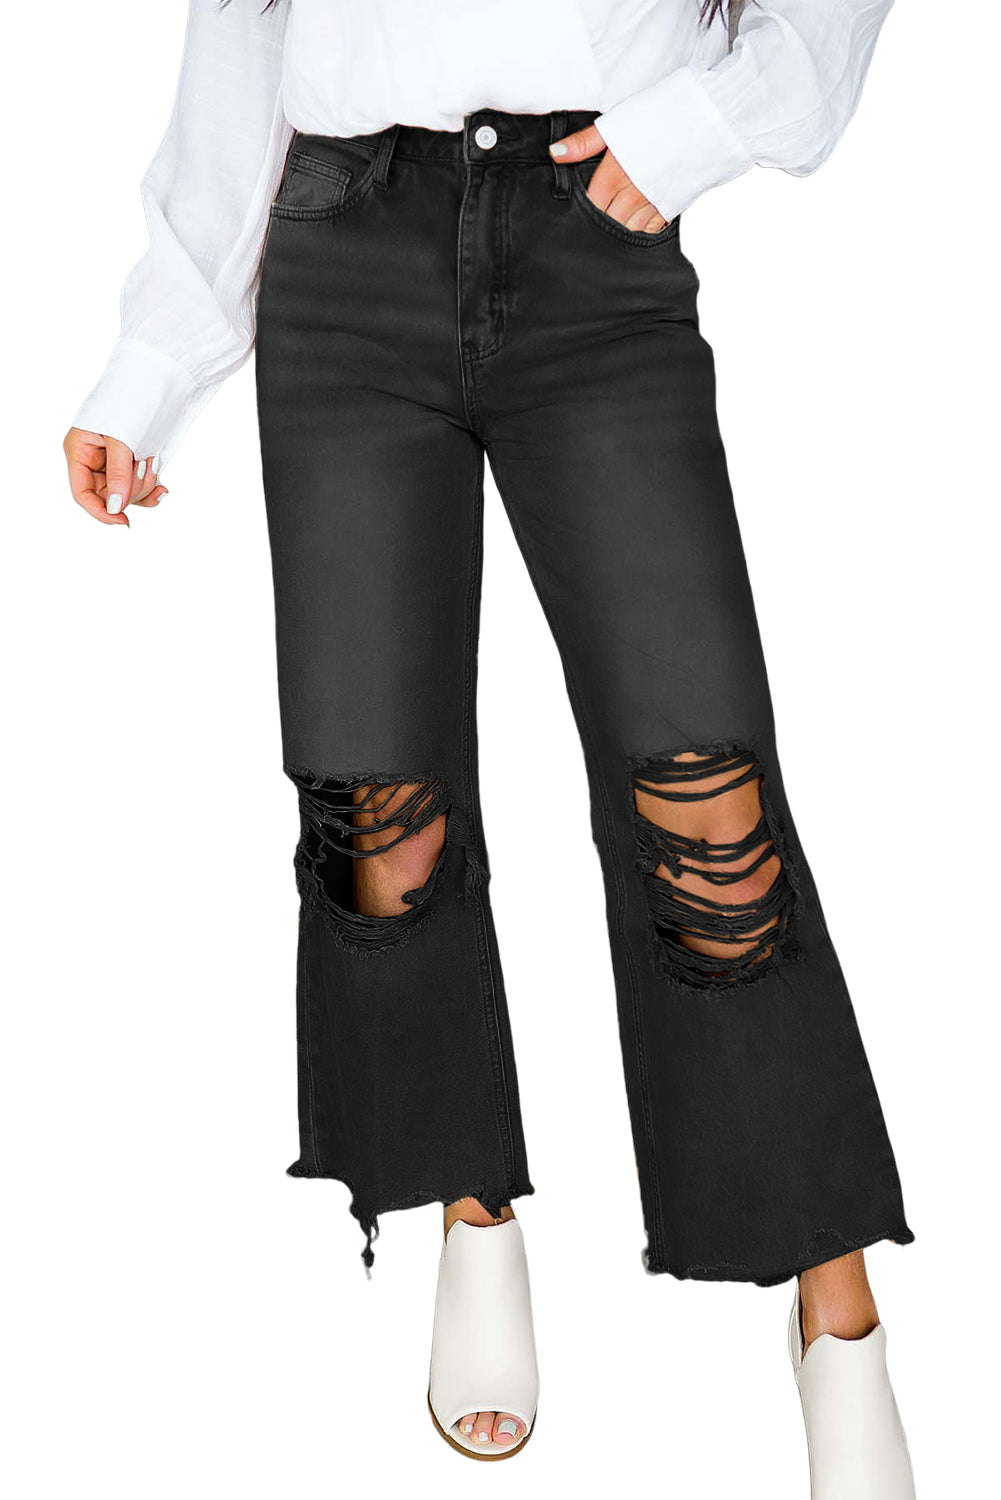 Black Distressed Hollow Out High Waist Flare Jeans